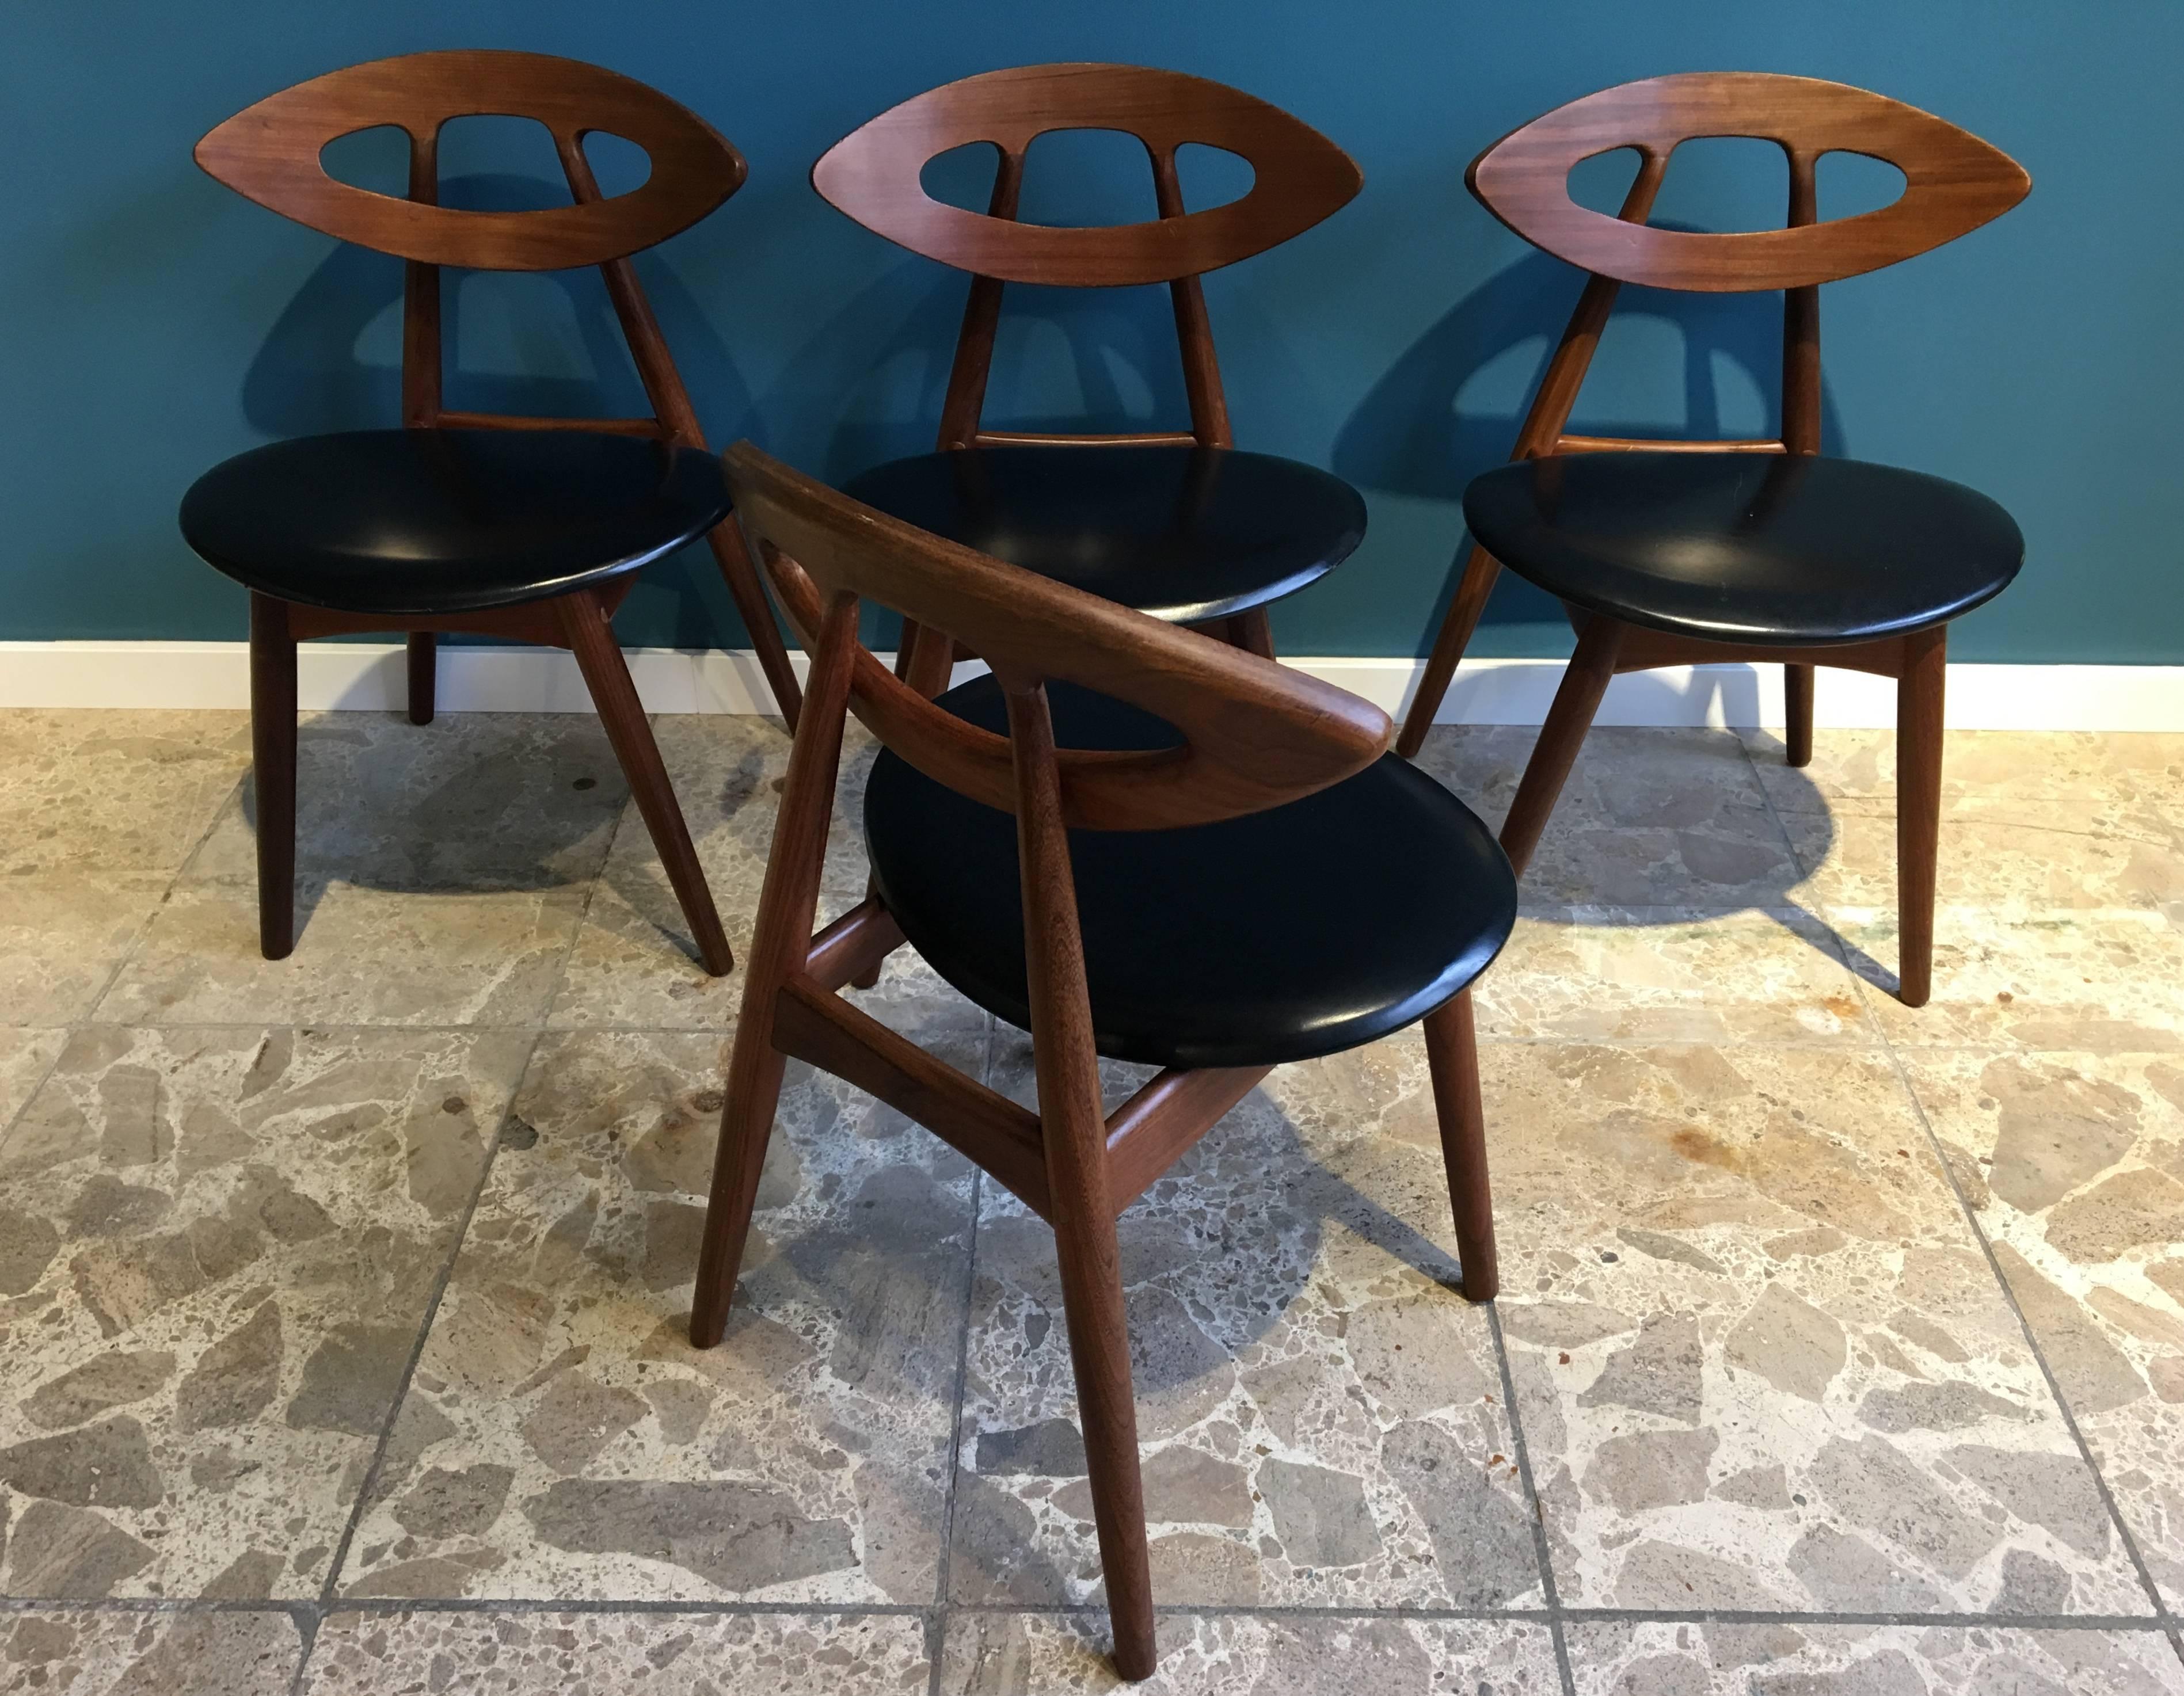 20th Century Eye Chairs by Ejvind A. Johansson for Ivan Gern, 1961, Set of Four